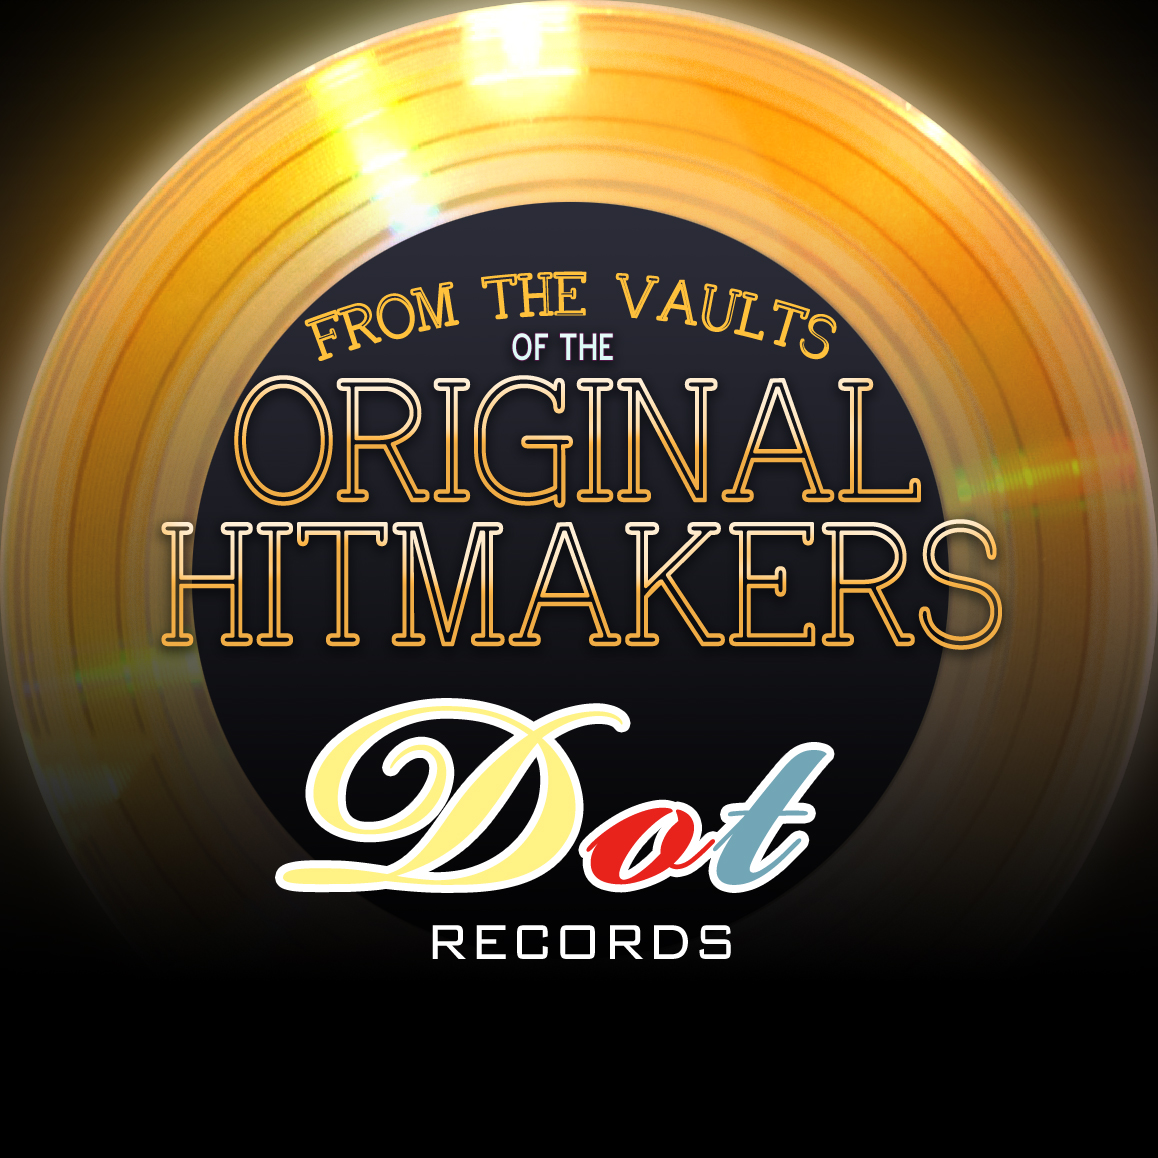 From the Vaults of the Original Hitmakers - Dot Records